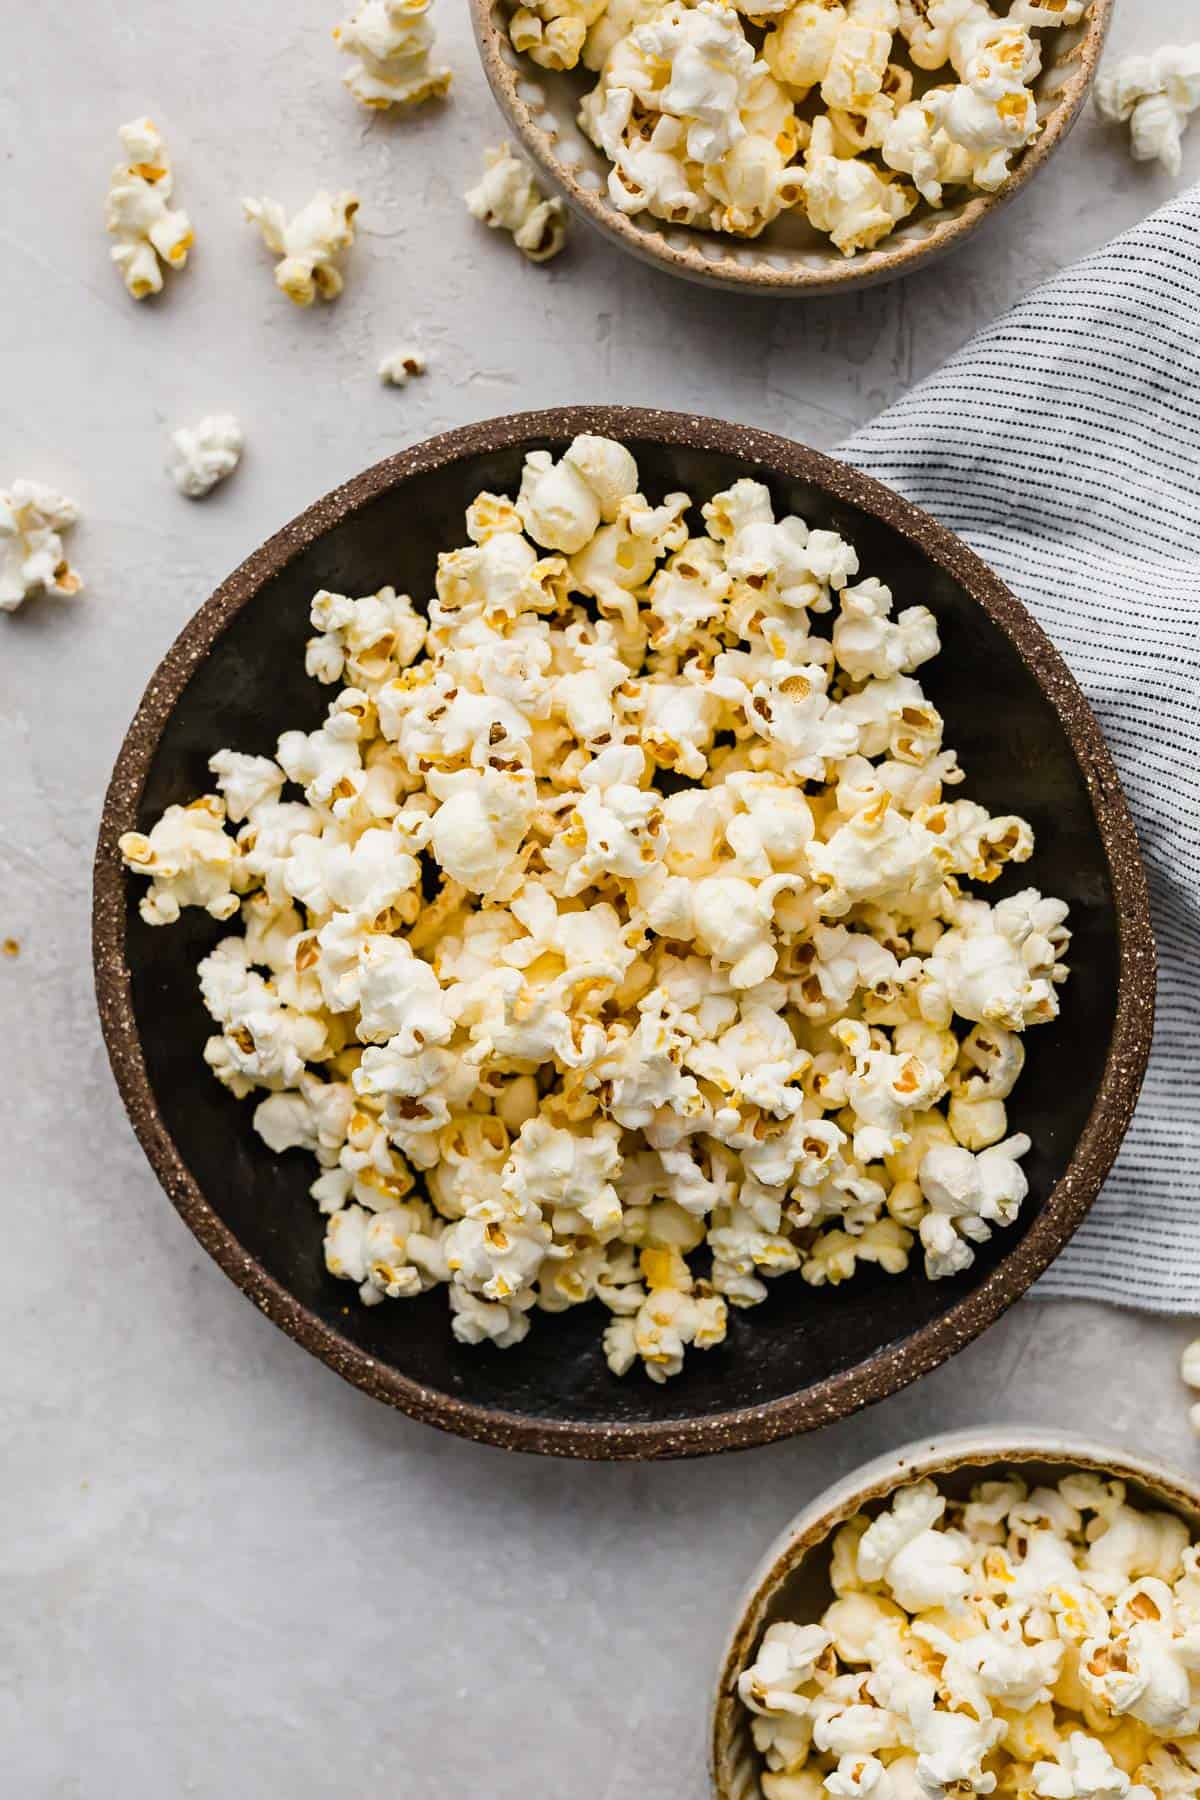 Movie Theater Popcorn made at home, in a black bowl on a white background.